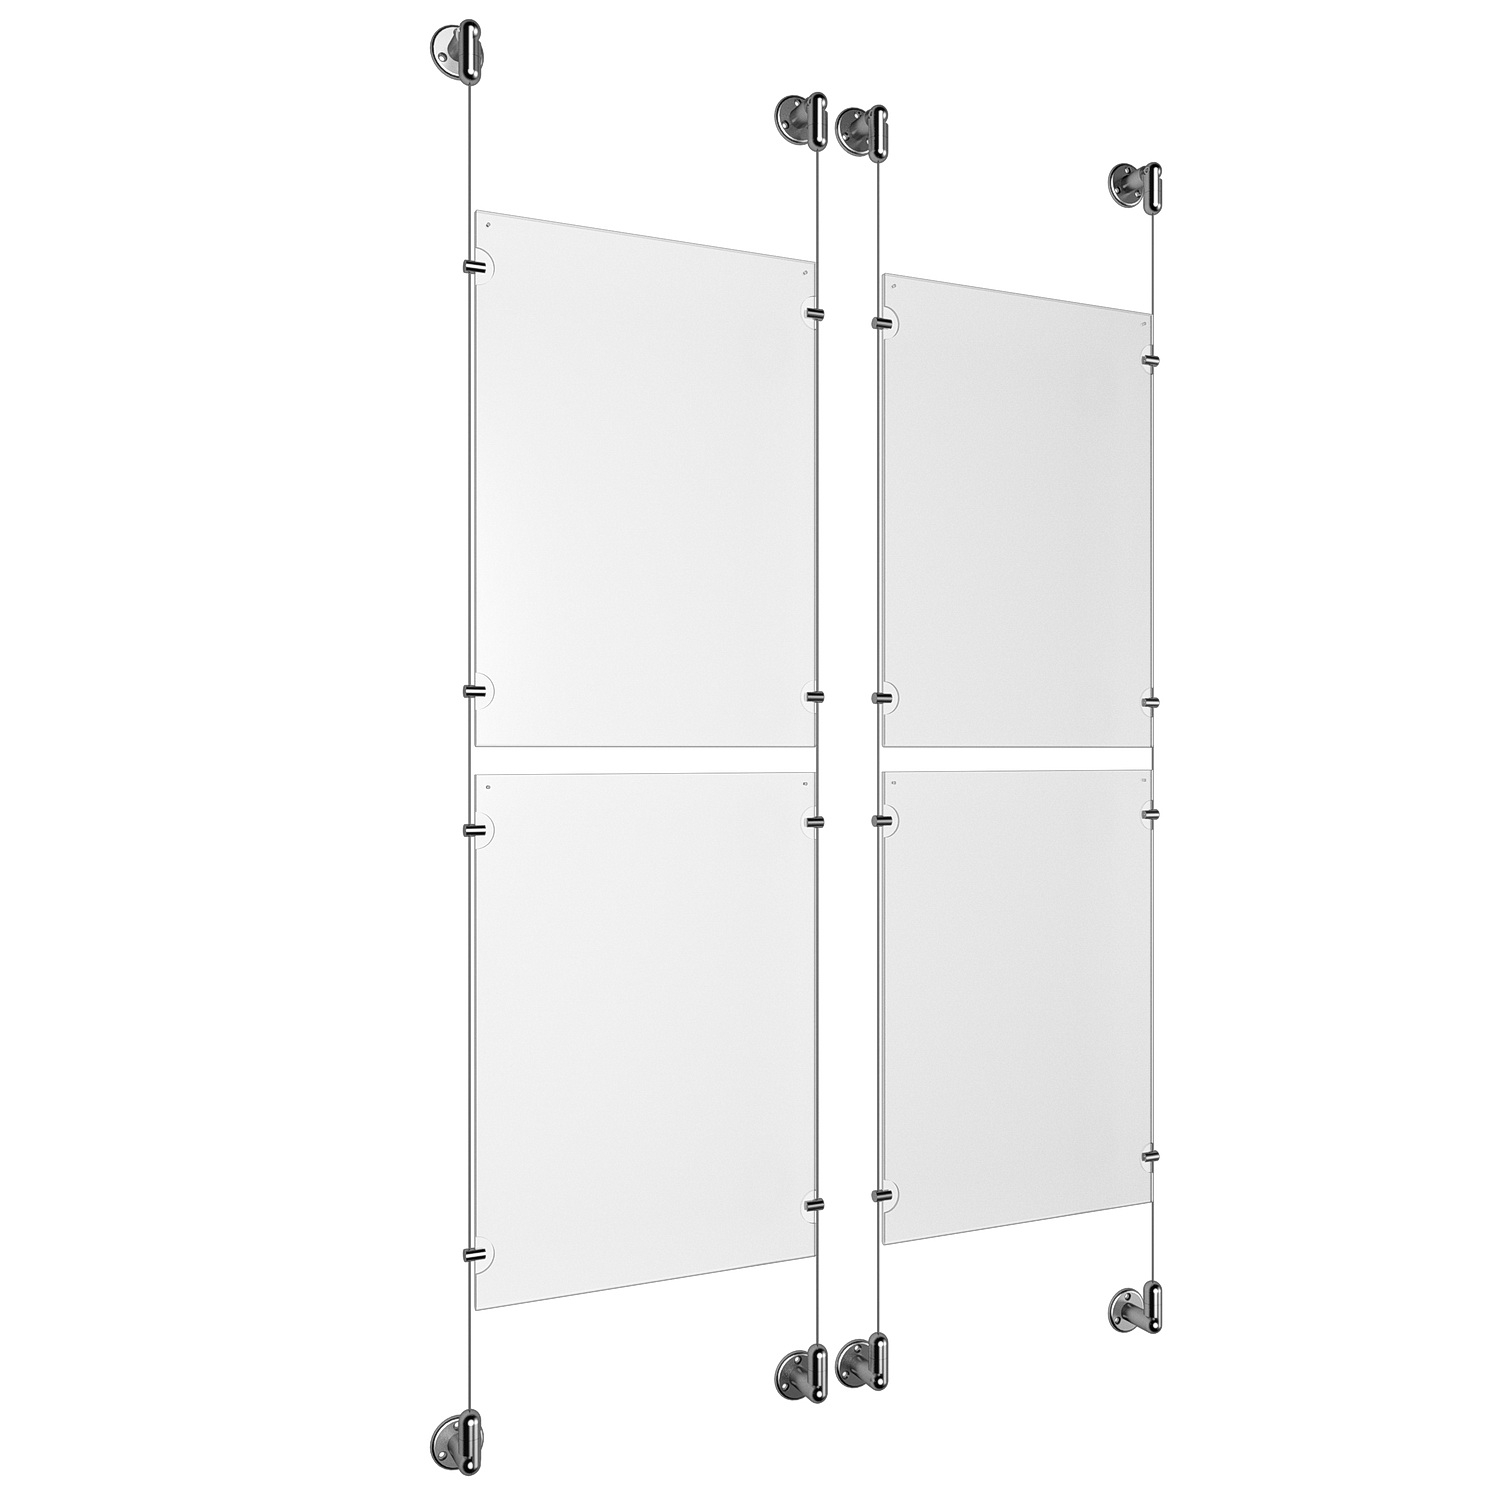 (4) 11'' Width x 17'' Height Clear Acrylic Frame & (4) Aluminum Clear Anodized Adjustable Angle Cable Systems with (16) Single-Sided Panel Grippers